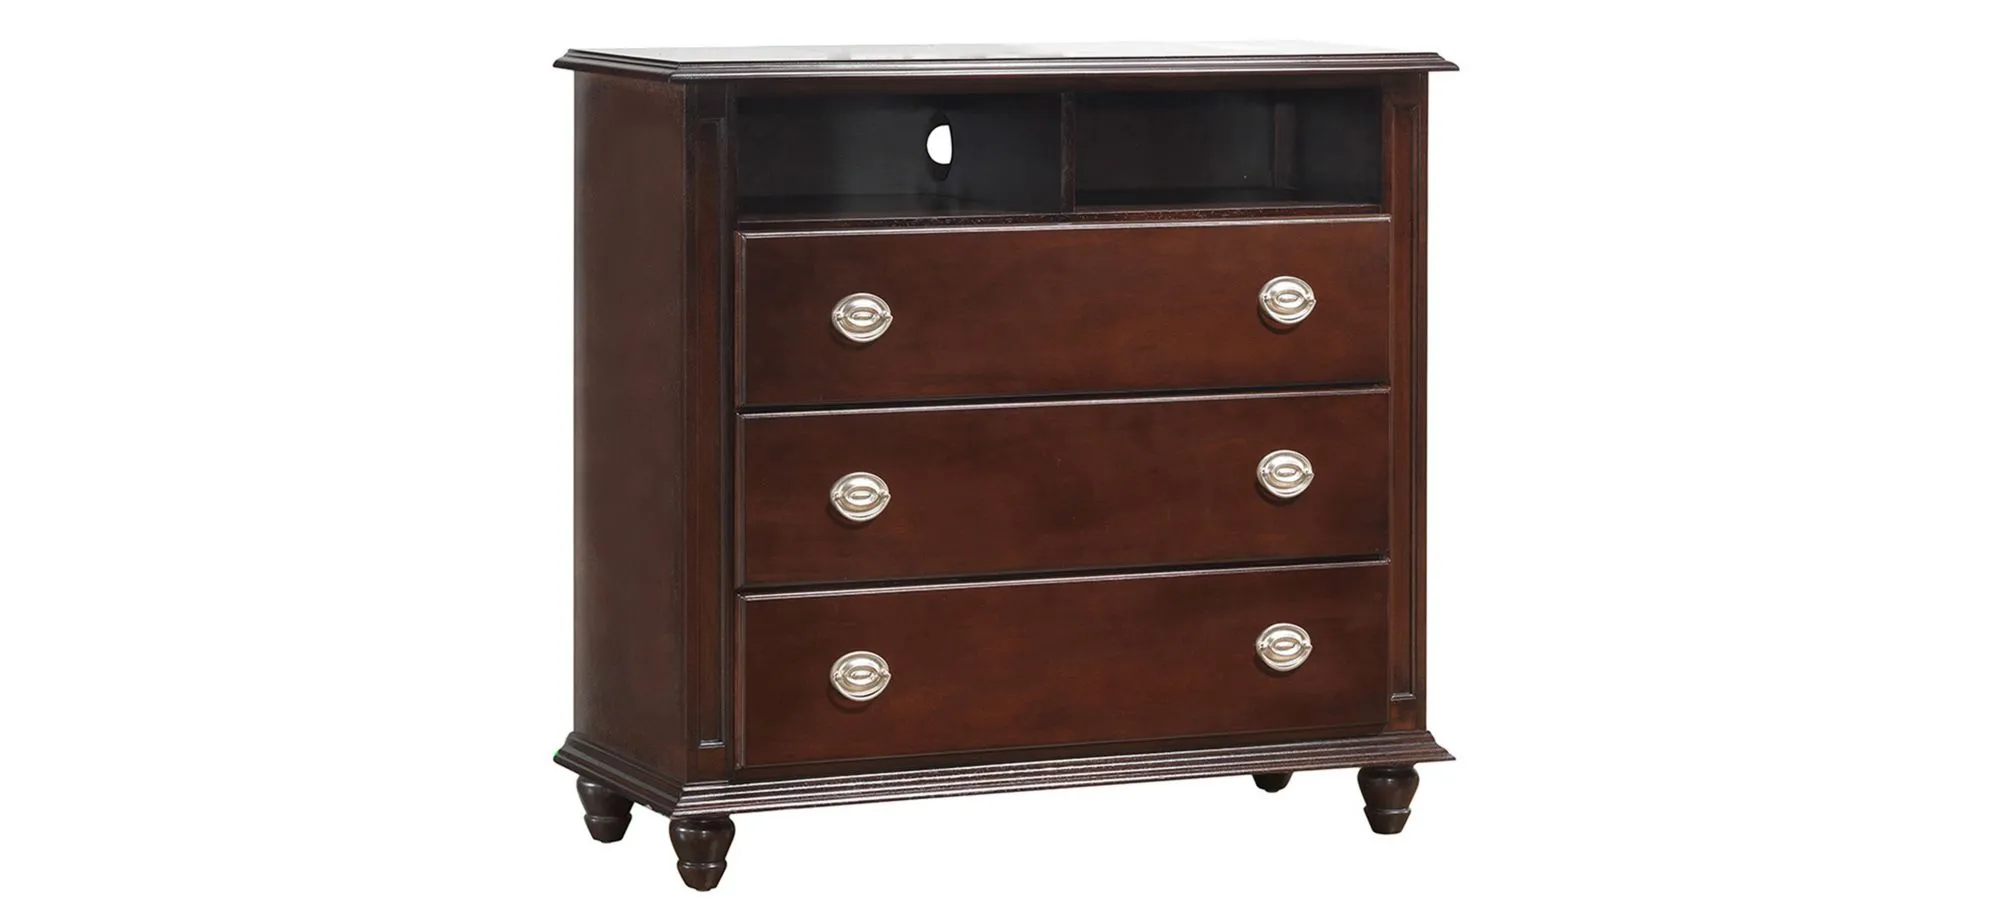 Summit Media Chest in Capuccino by Glory Furniture